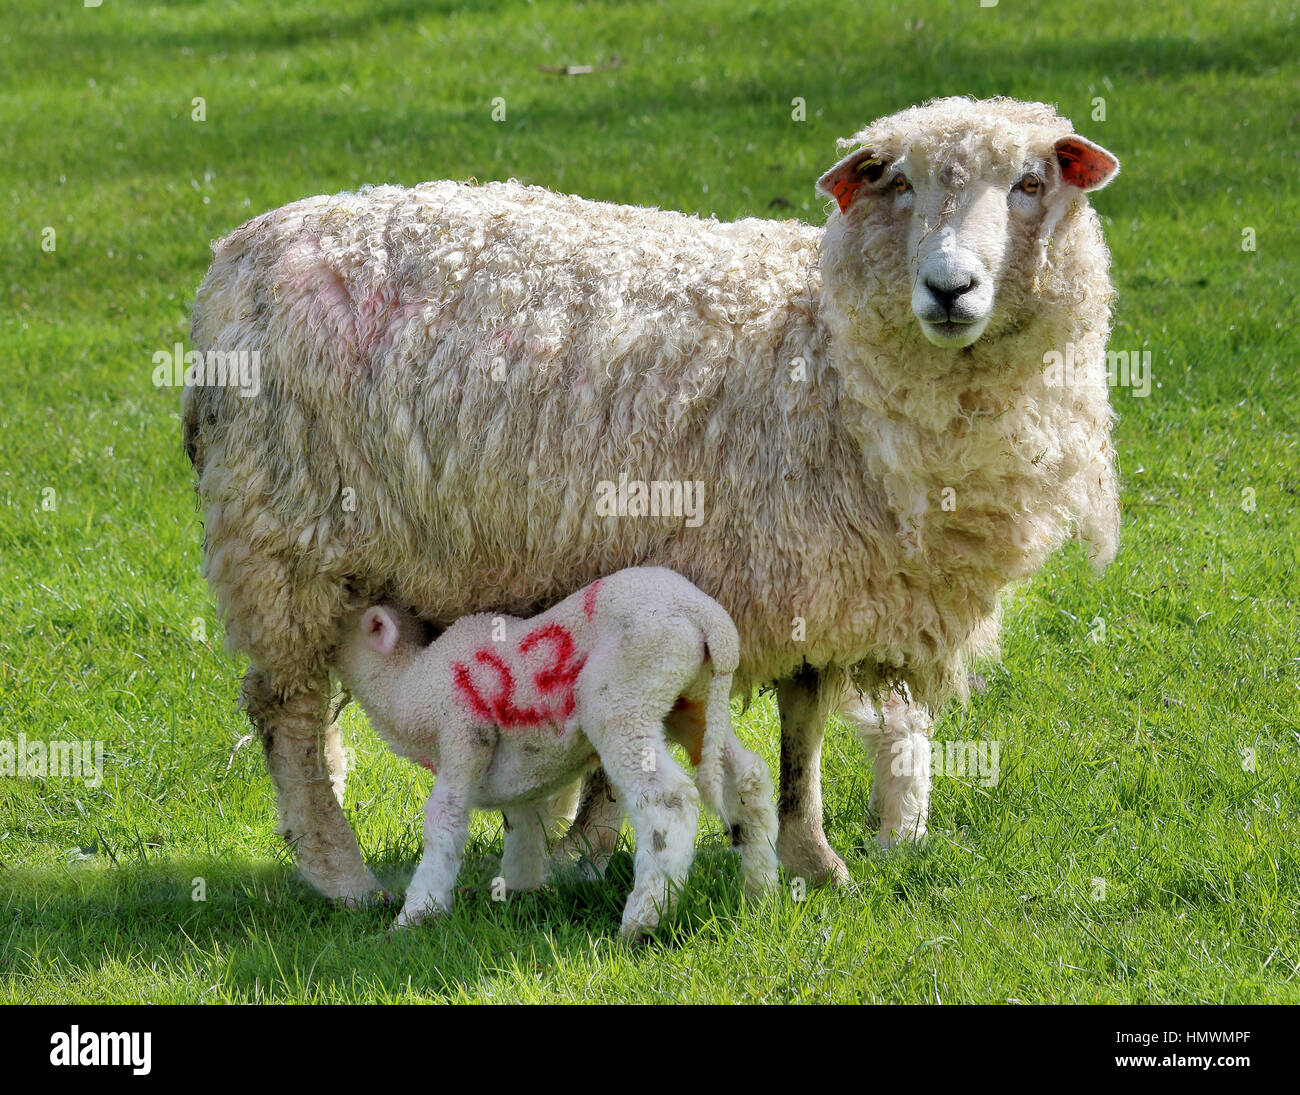 Spring Lamb feeding from a Ewe on a grassy meadow Stock Photo